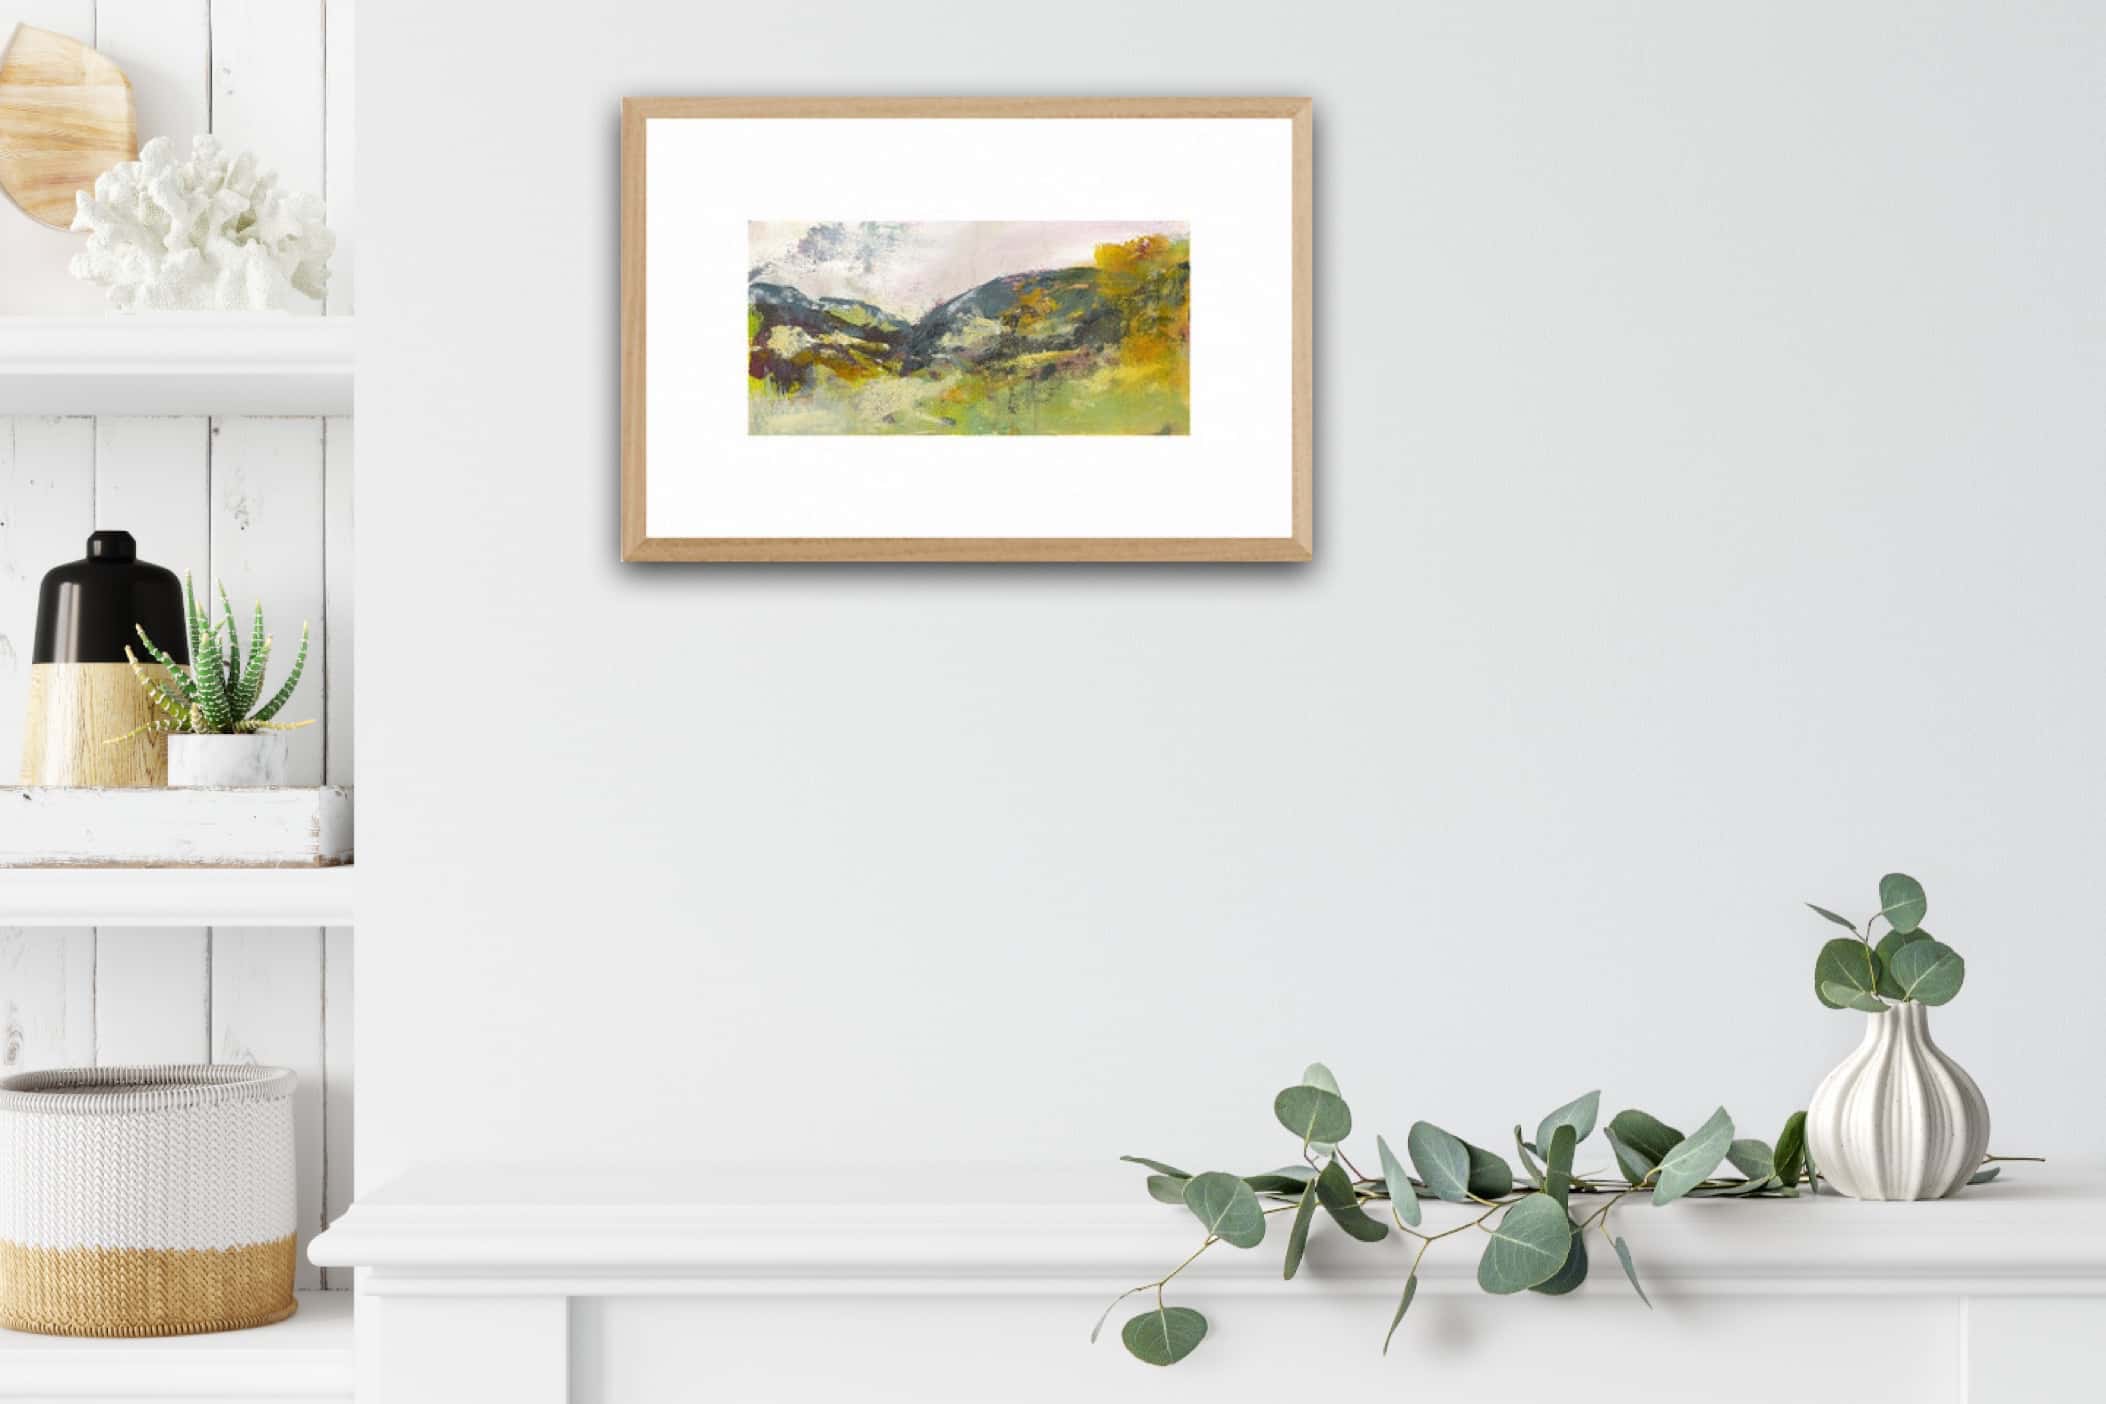 An acrylic painting of the hill trails in Wales on a White wall